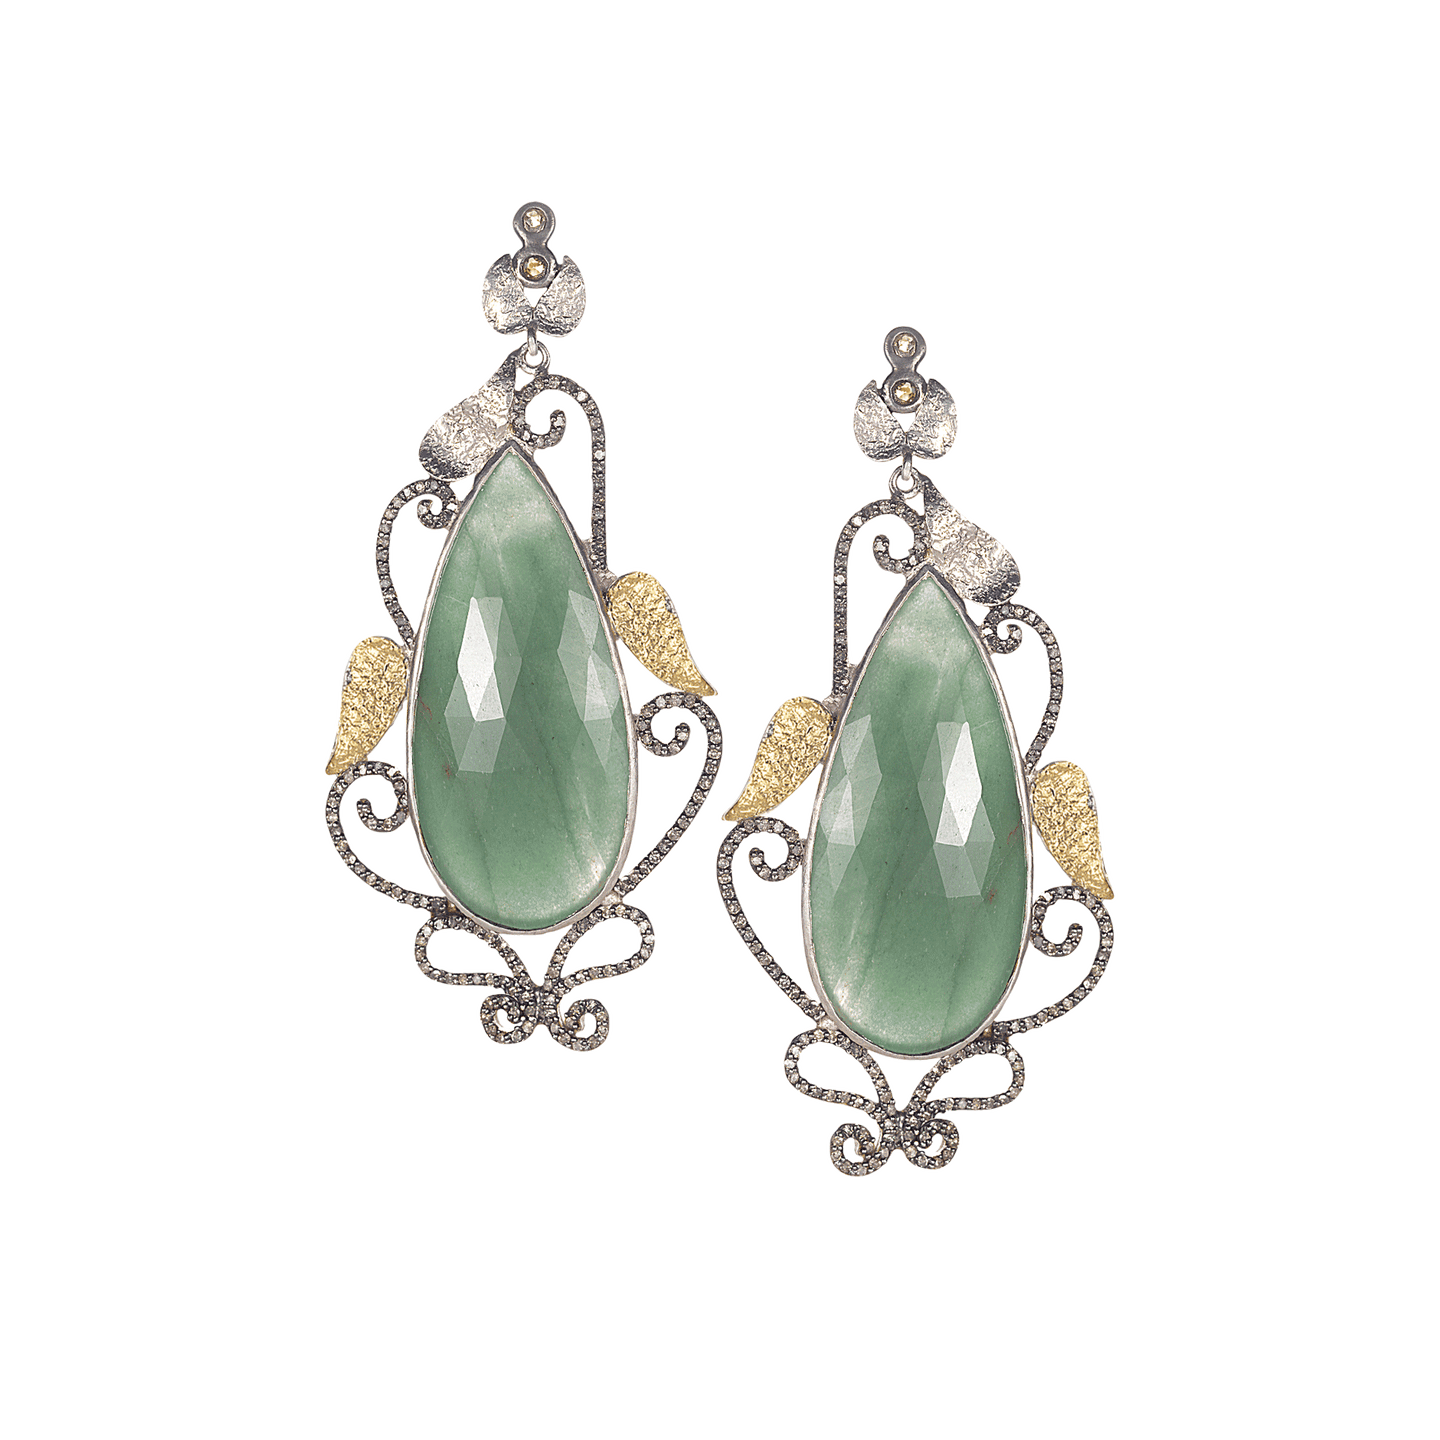 Sterling Silver Elongated Pear Shaped Green Stone Earrings - Coomi